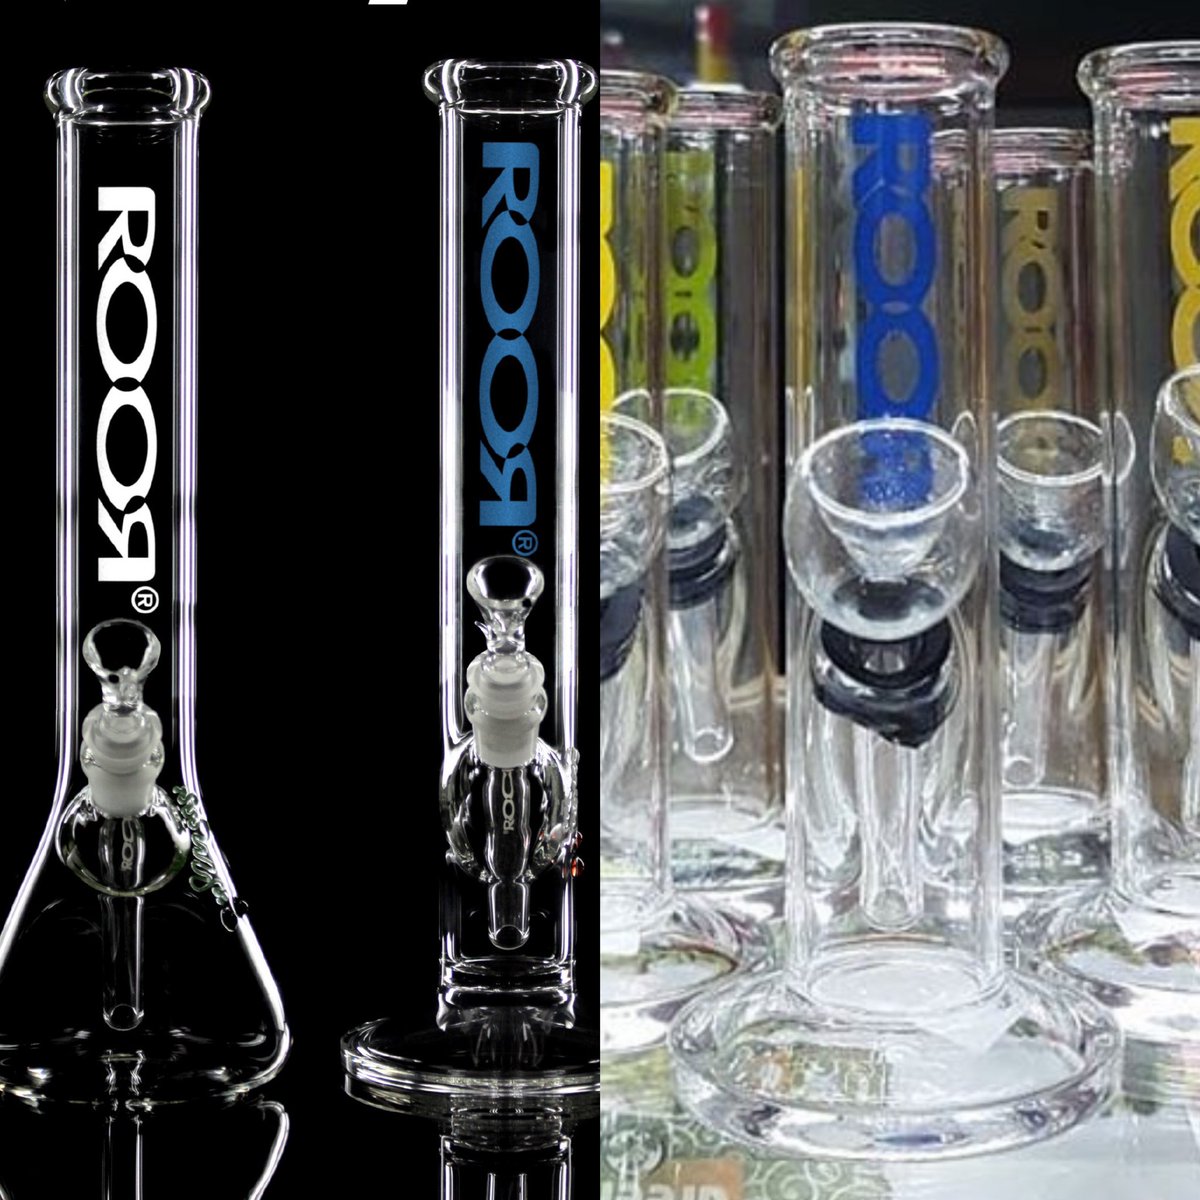 5) Glass-on-glass joints! The RooR legacy includes having invented glass-on-glass back in 1995 (s/o our founder Martin Birzle for that one) so you will never see a rubber grommet on a real RooR as pictured to the right 